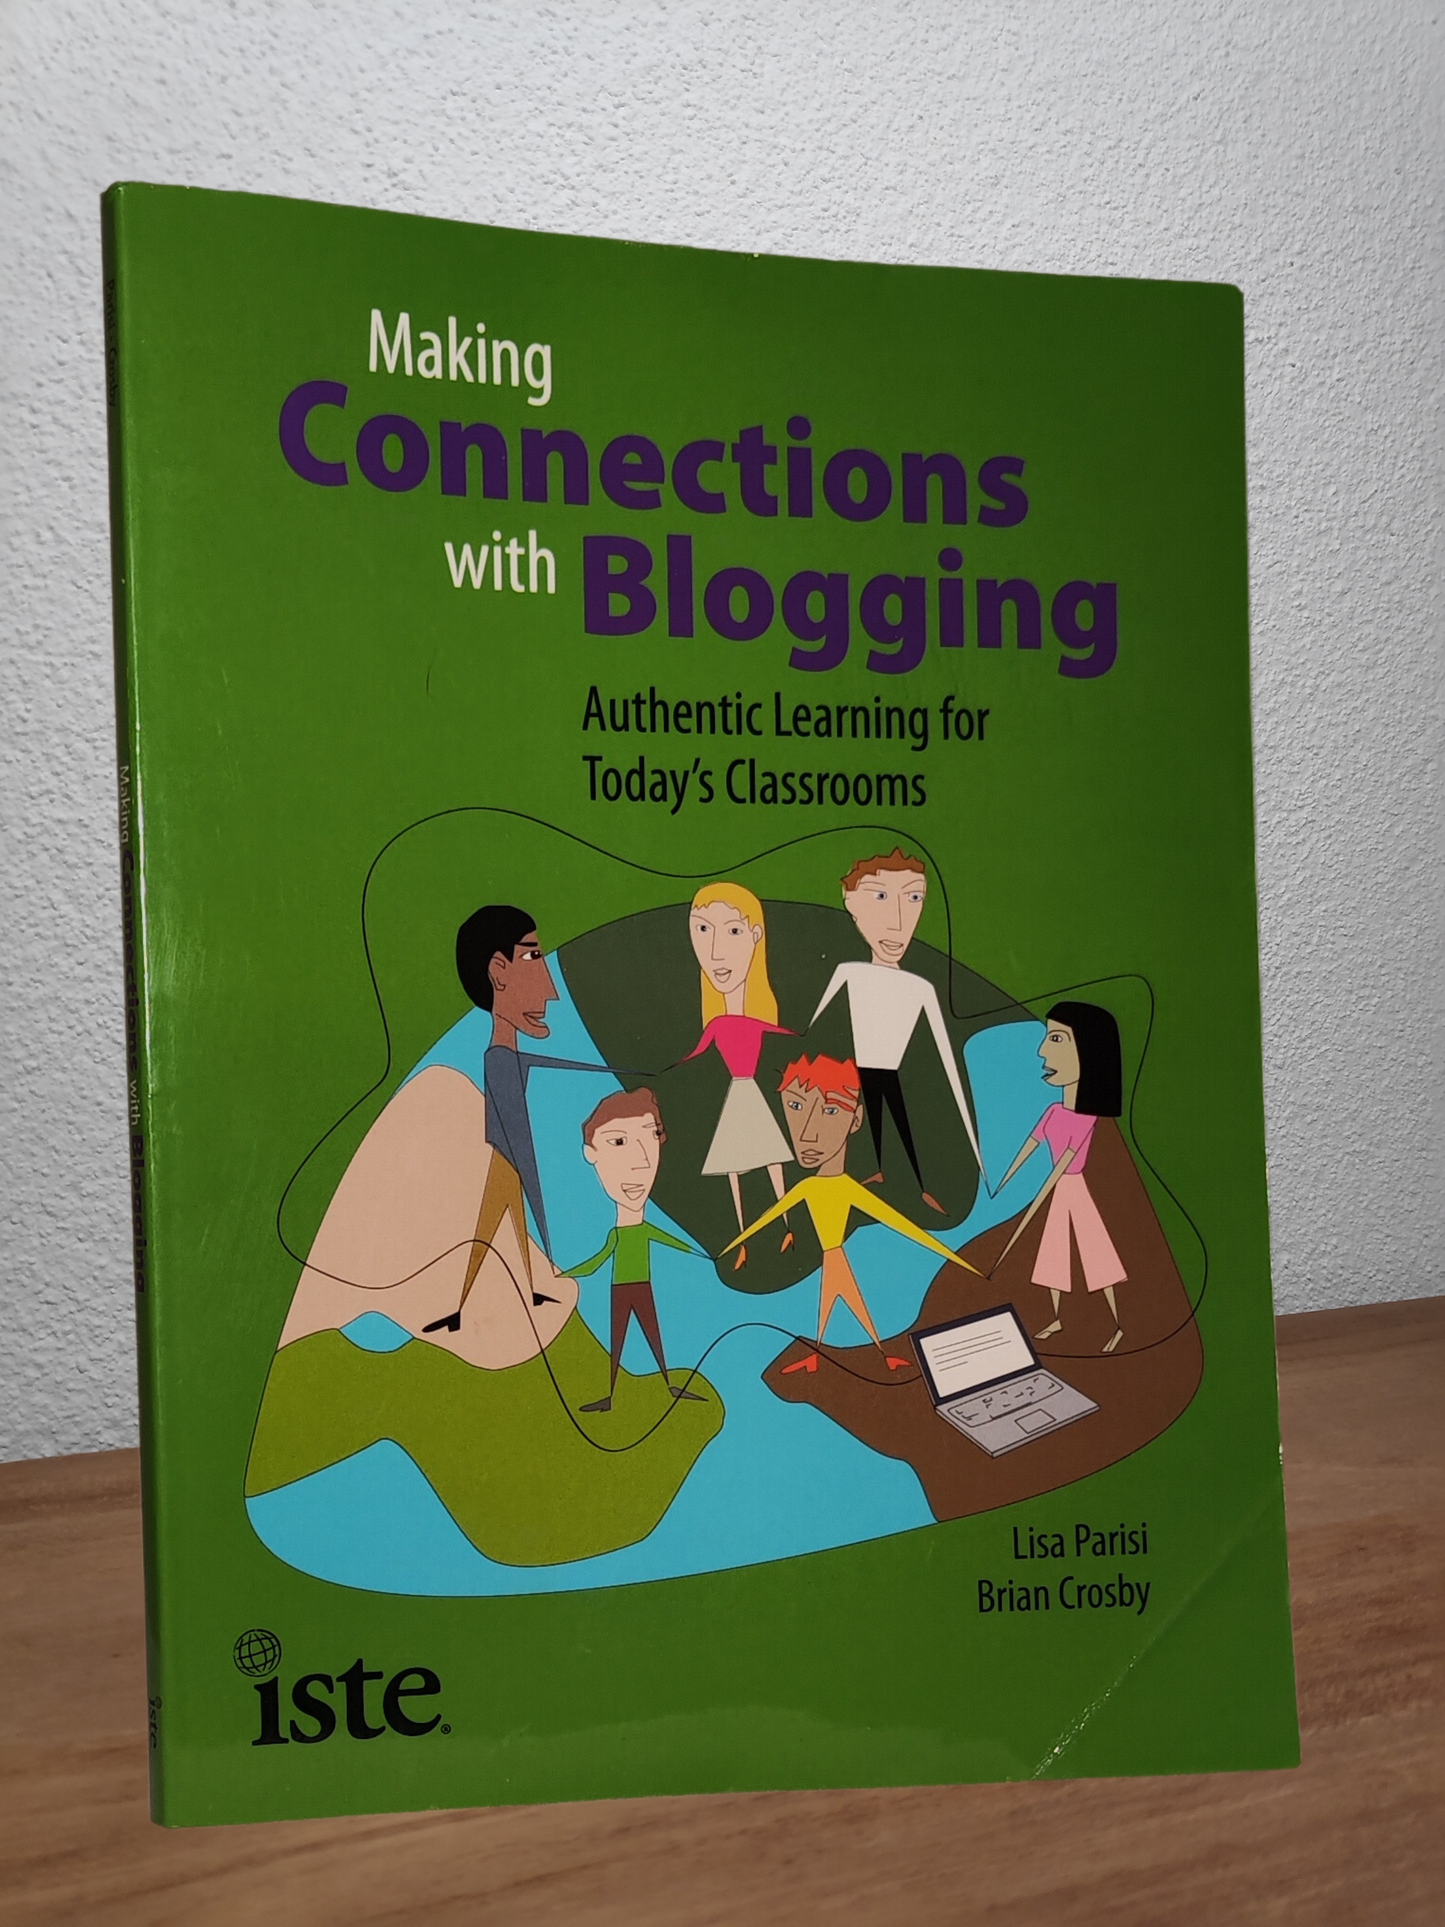 Lisa Parisi and Brian Crosby - Making Connections with Blogging - Second-hand english book to deliver in Zurich & Switzerland